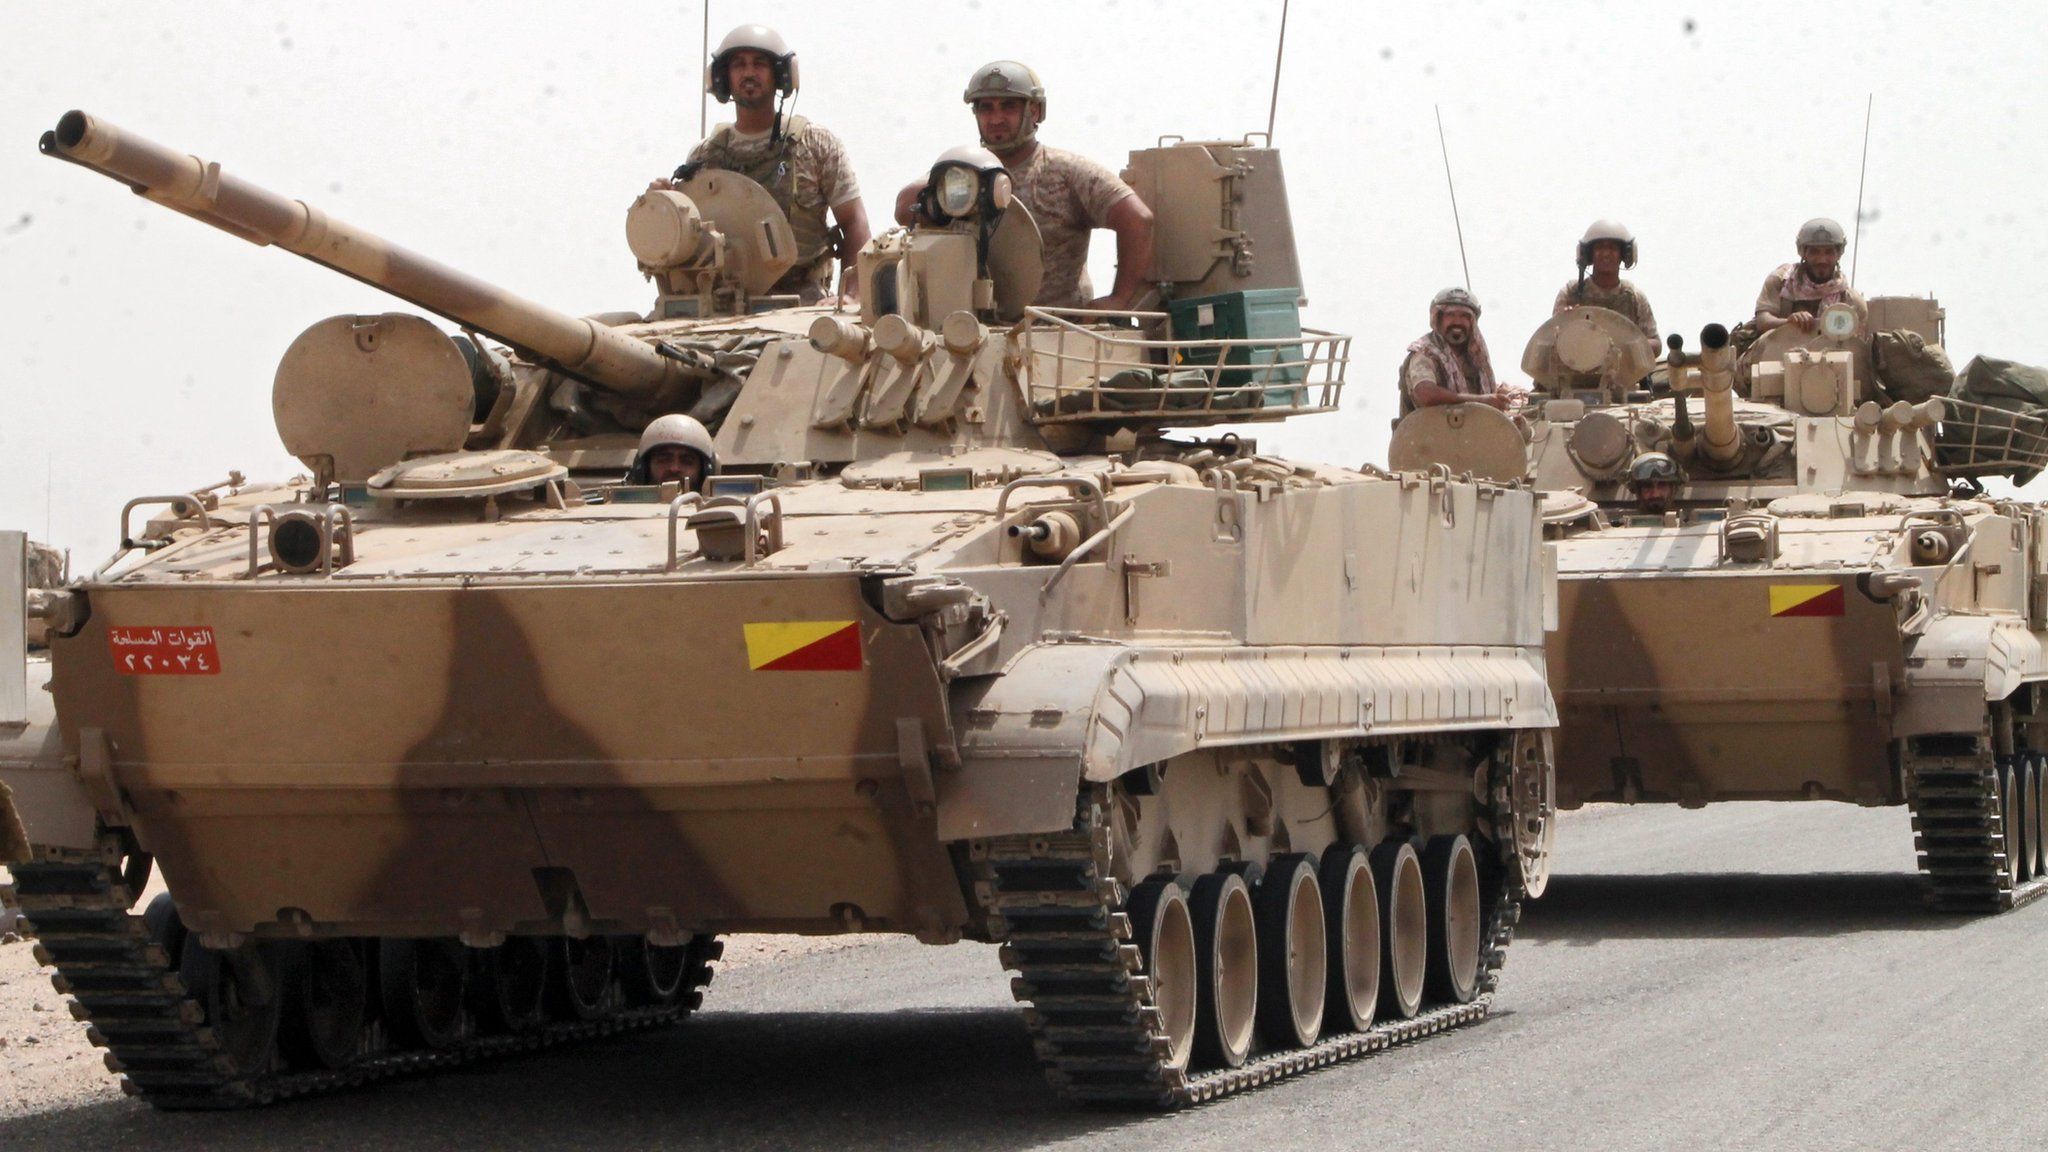 Saudi-led coalition military personnel travel through Aden (3 August 2015)